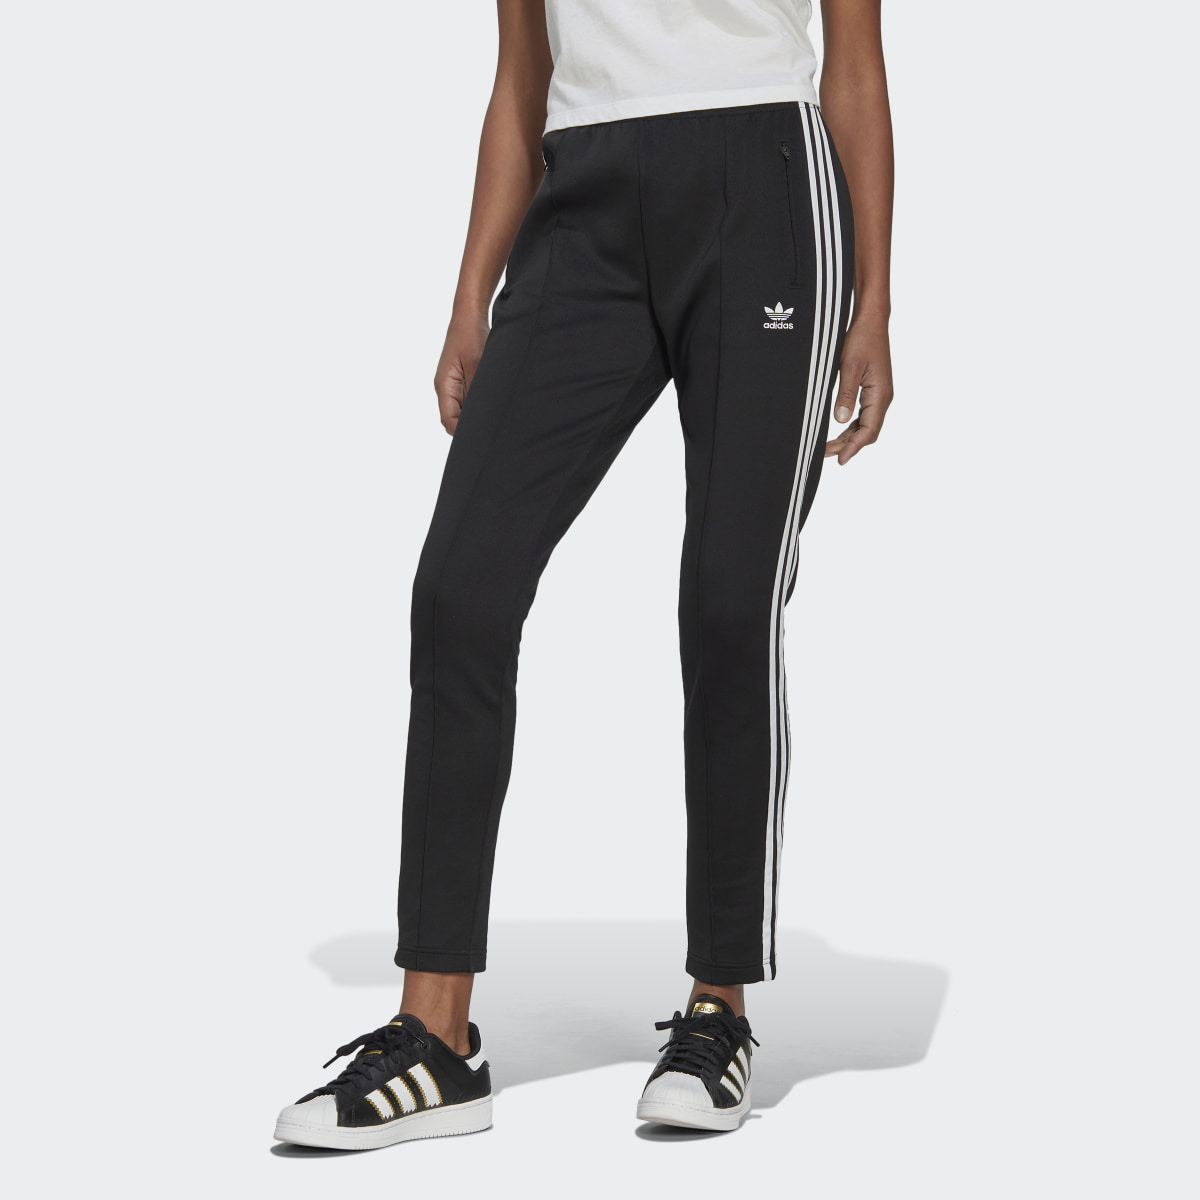 women's fitted adidas tracksuit